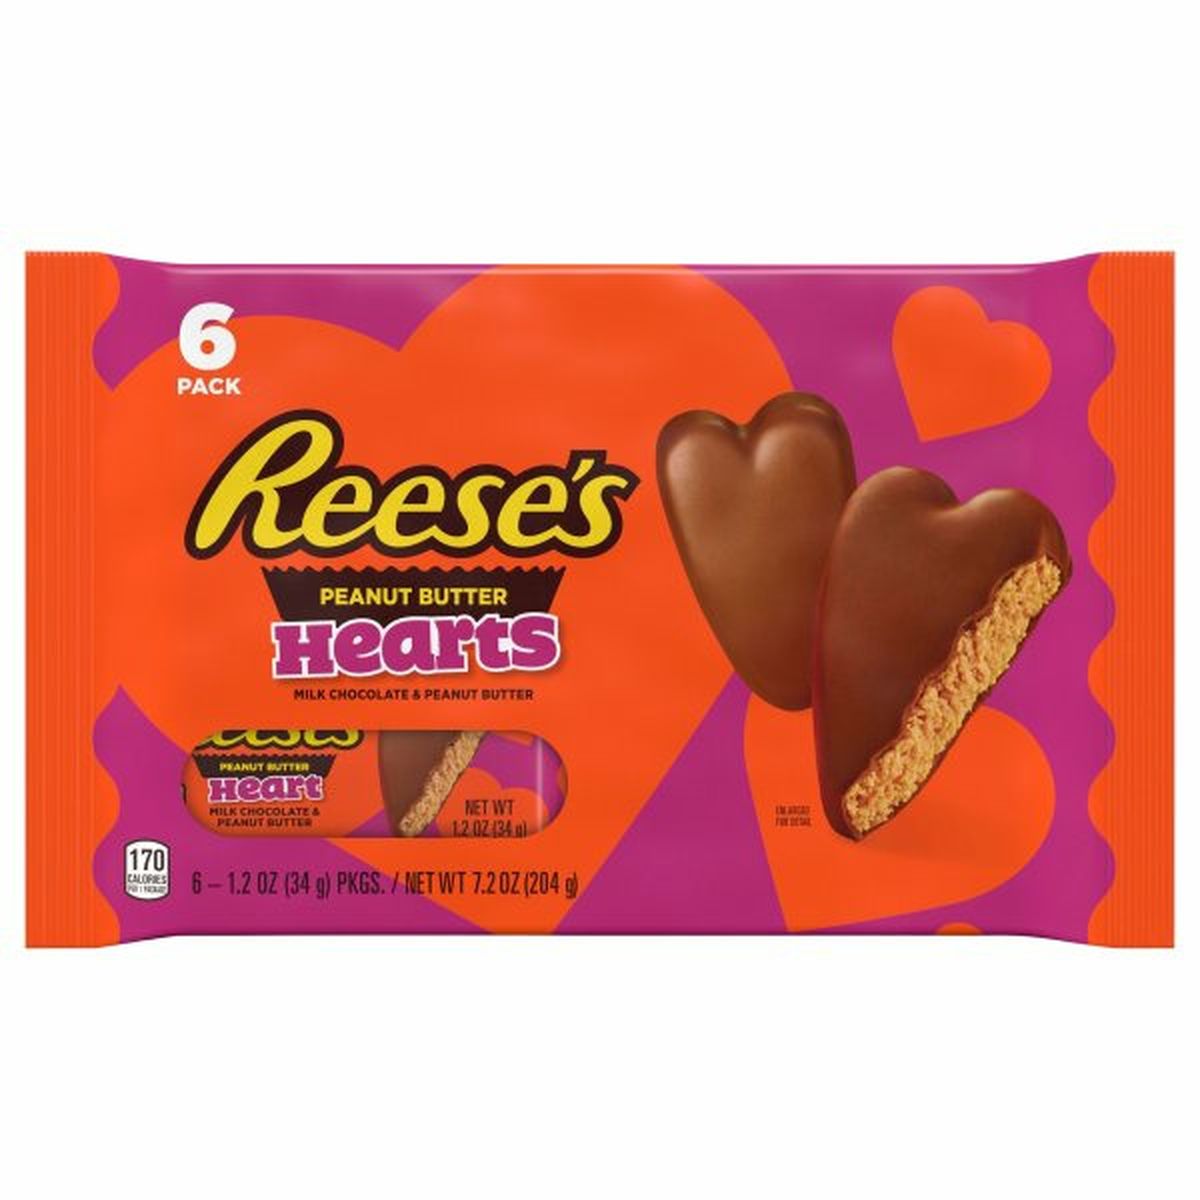 Calories in Reese's Peanut Butter, Hearts, 6 Pack